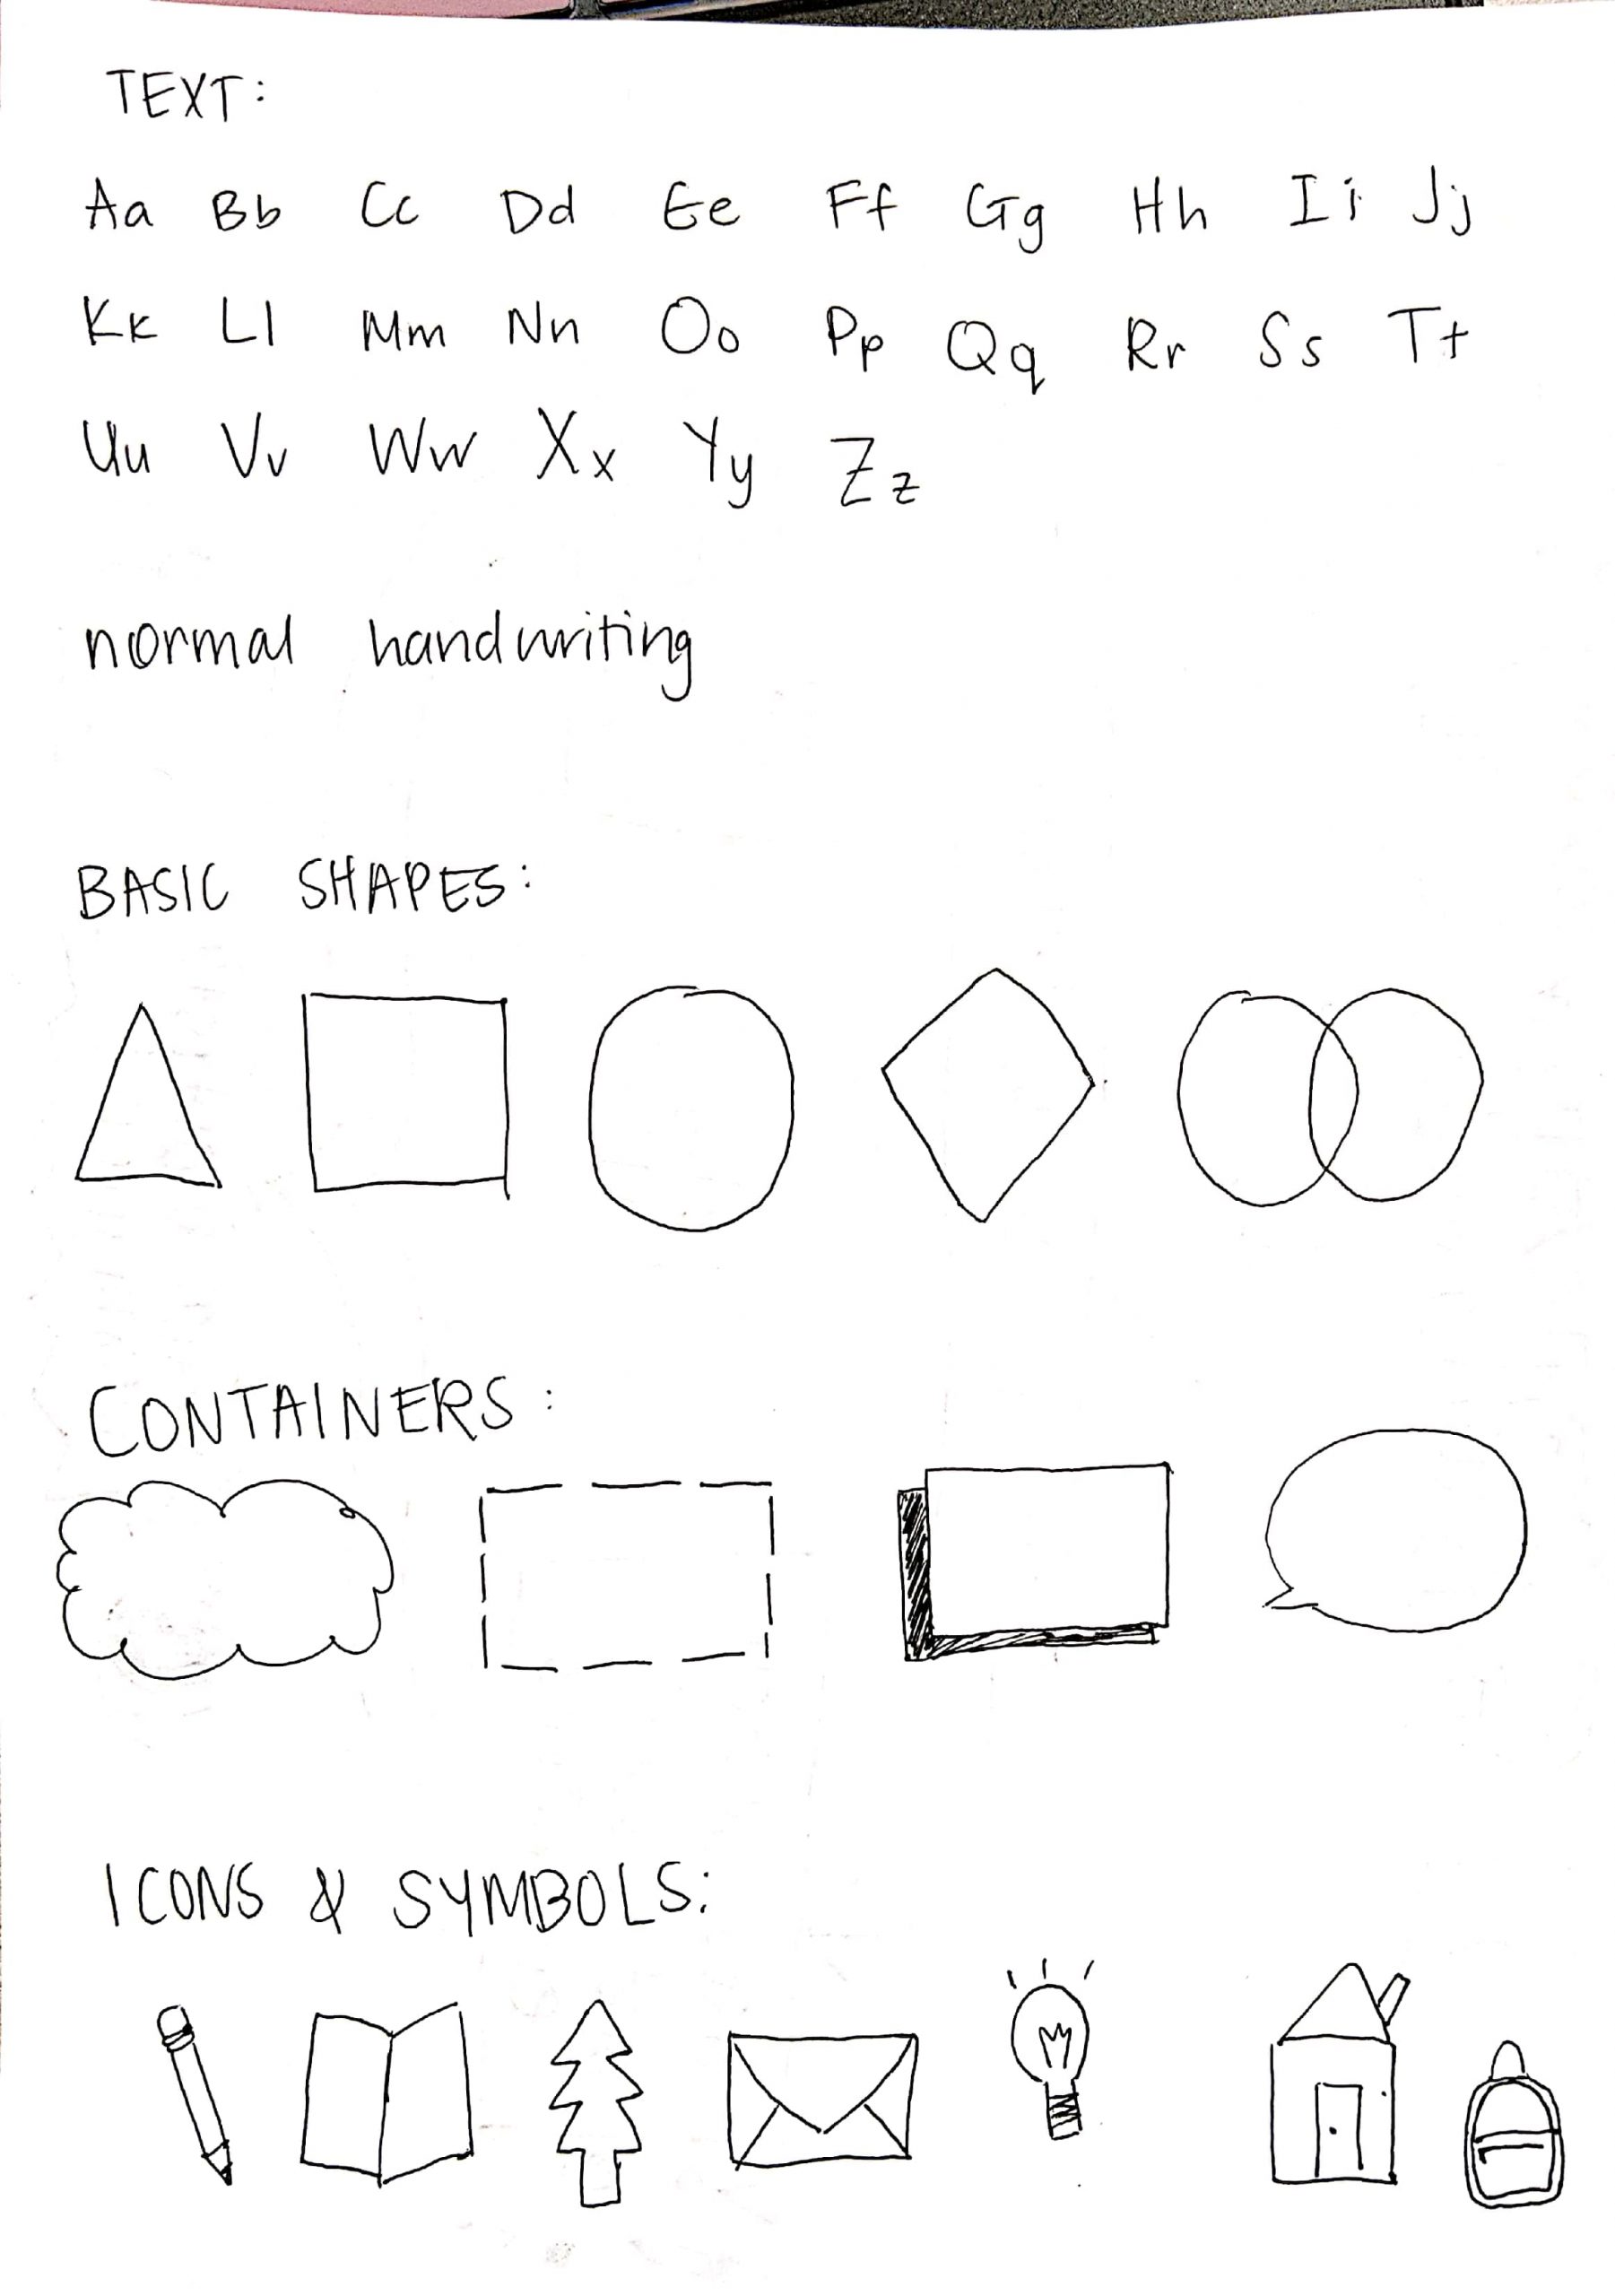 Sketchnoting Elements: text, normal handwriting, basic shapes, containers, icons and symbols